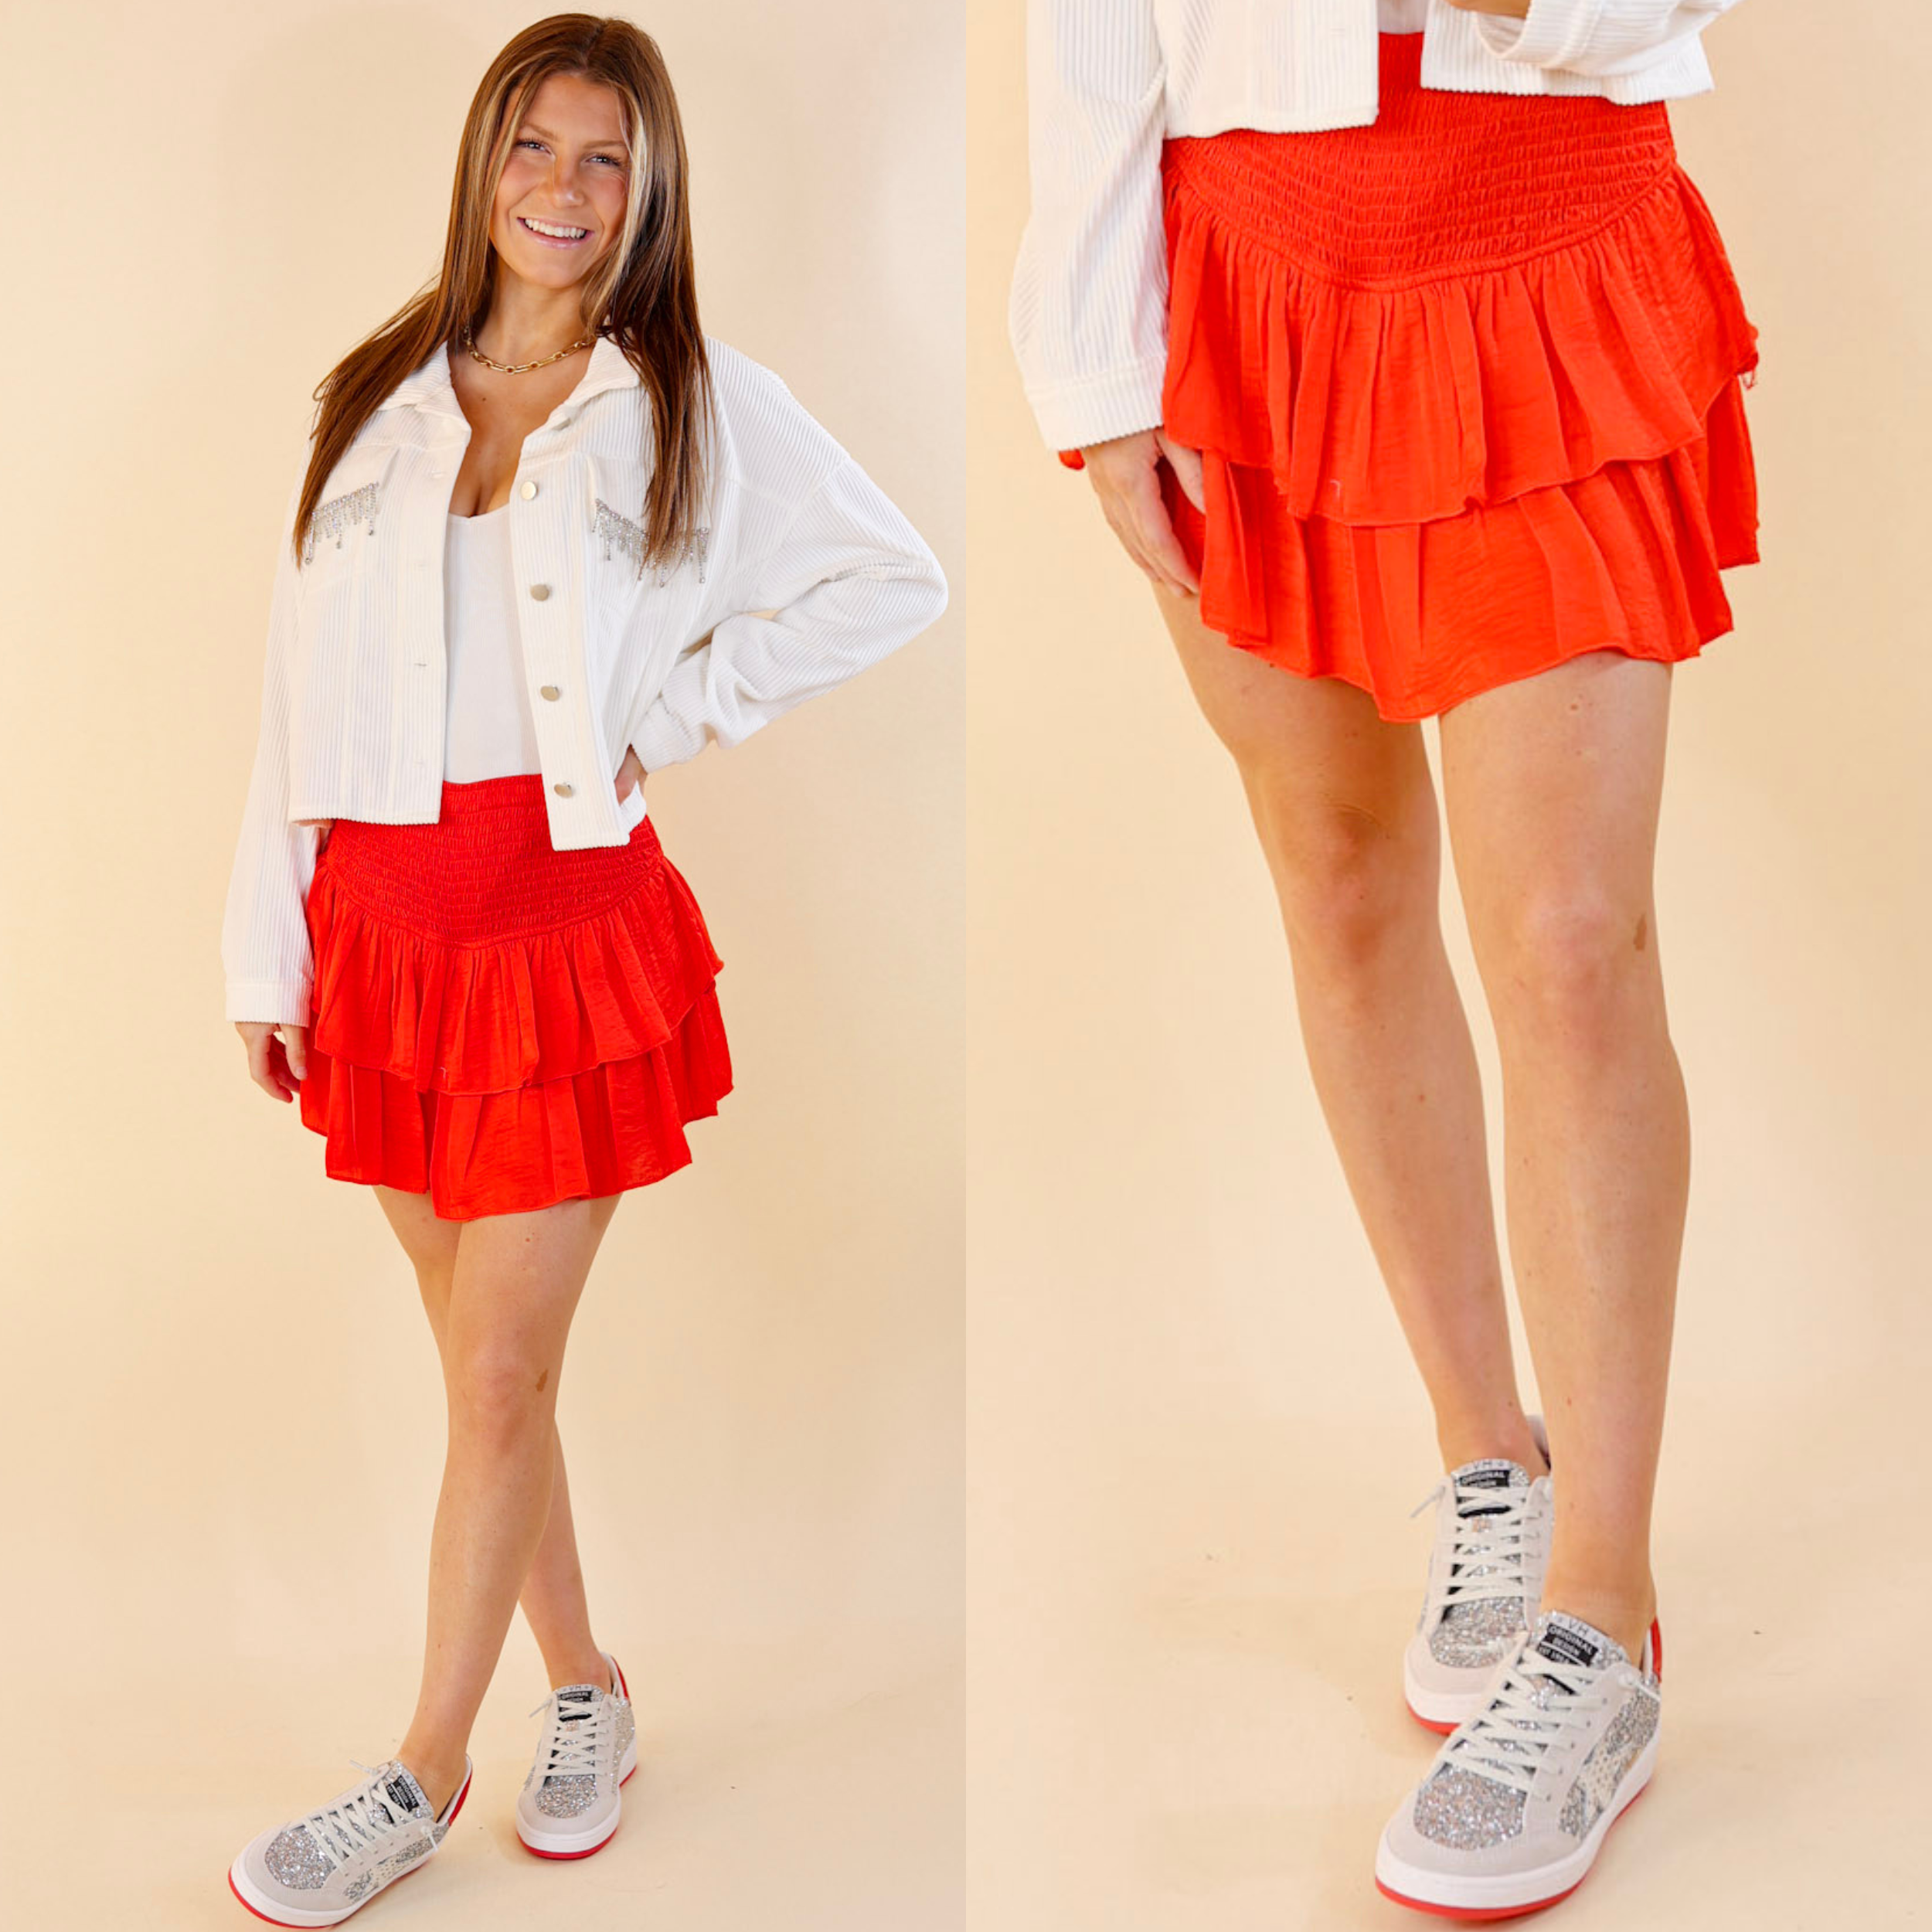 in the picture the model is wearing a ruffle red mini skort with a white background